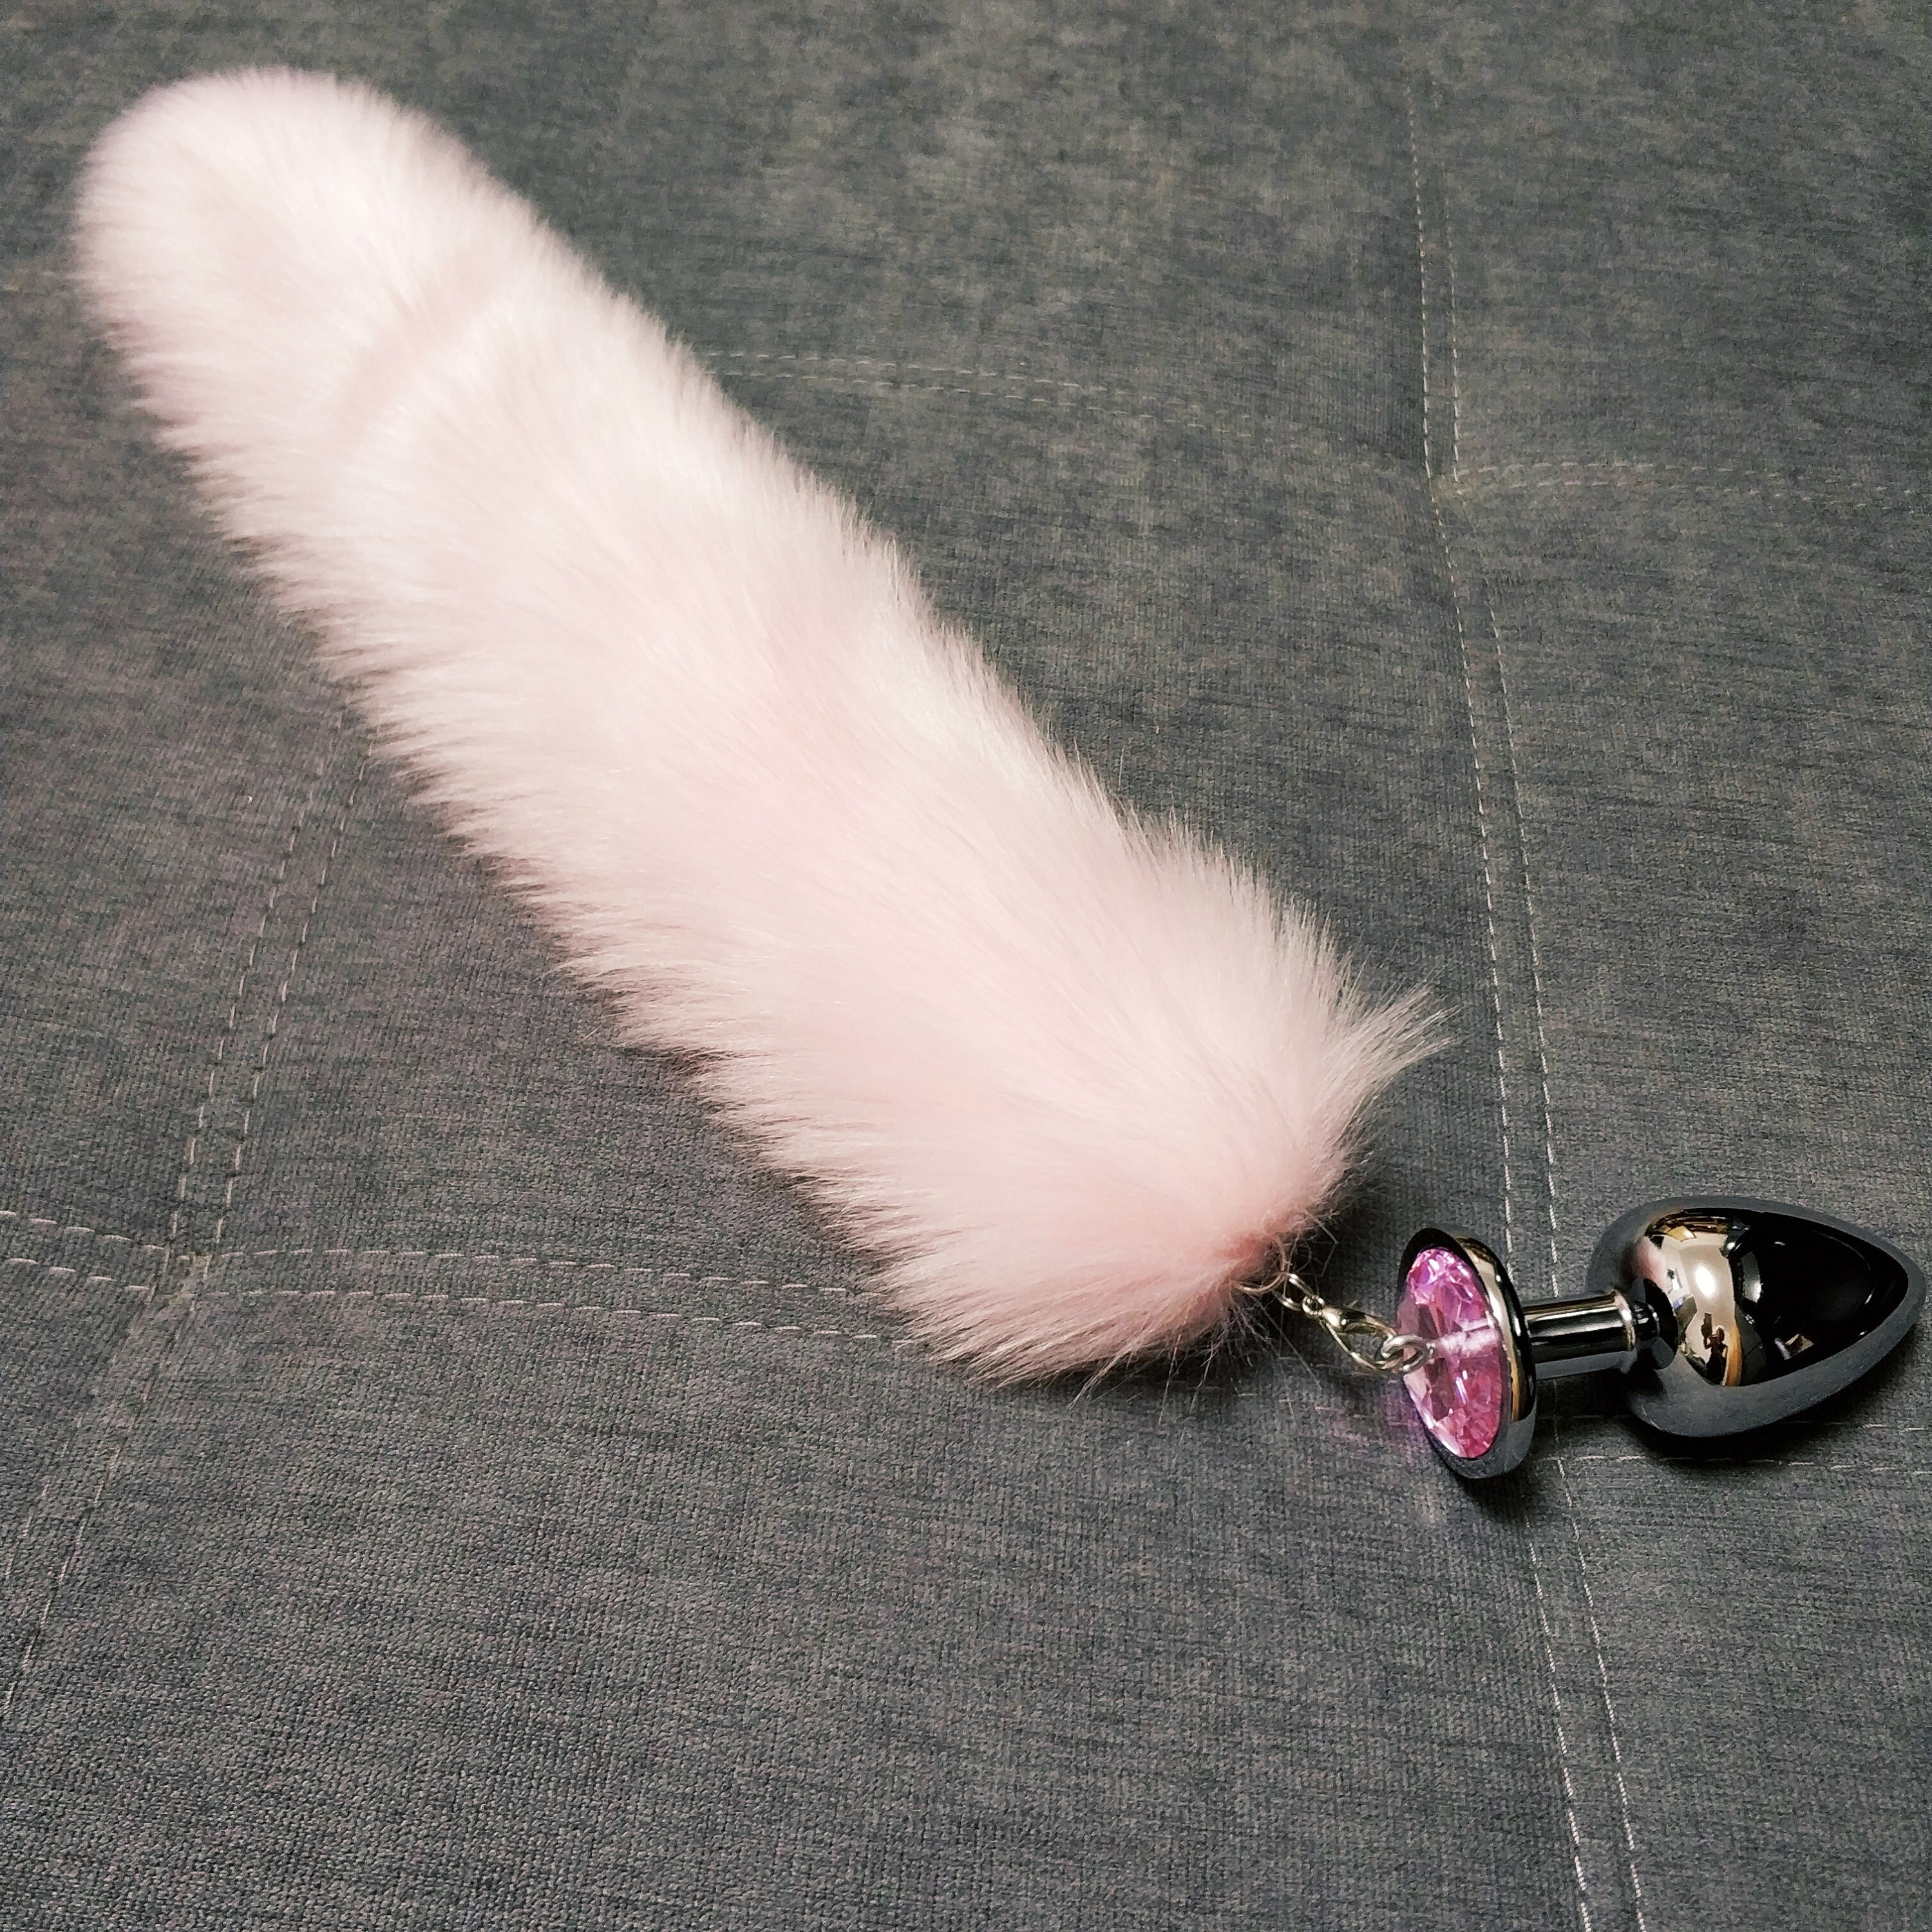 chris malt recommends Cat Tail Buttplug